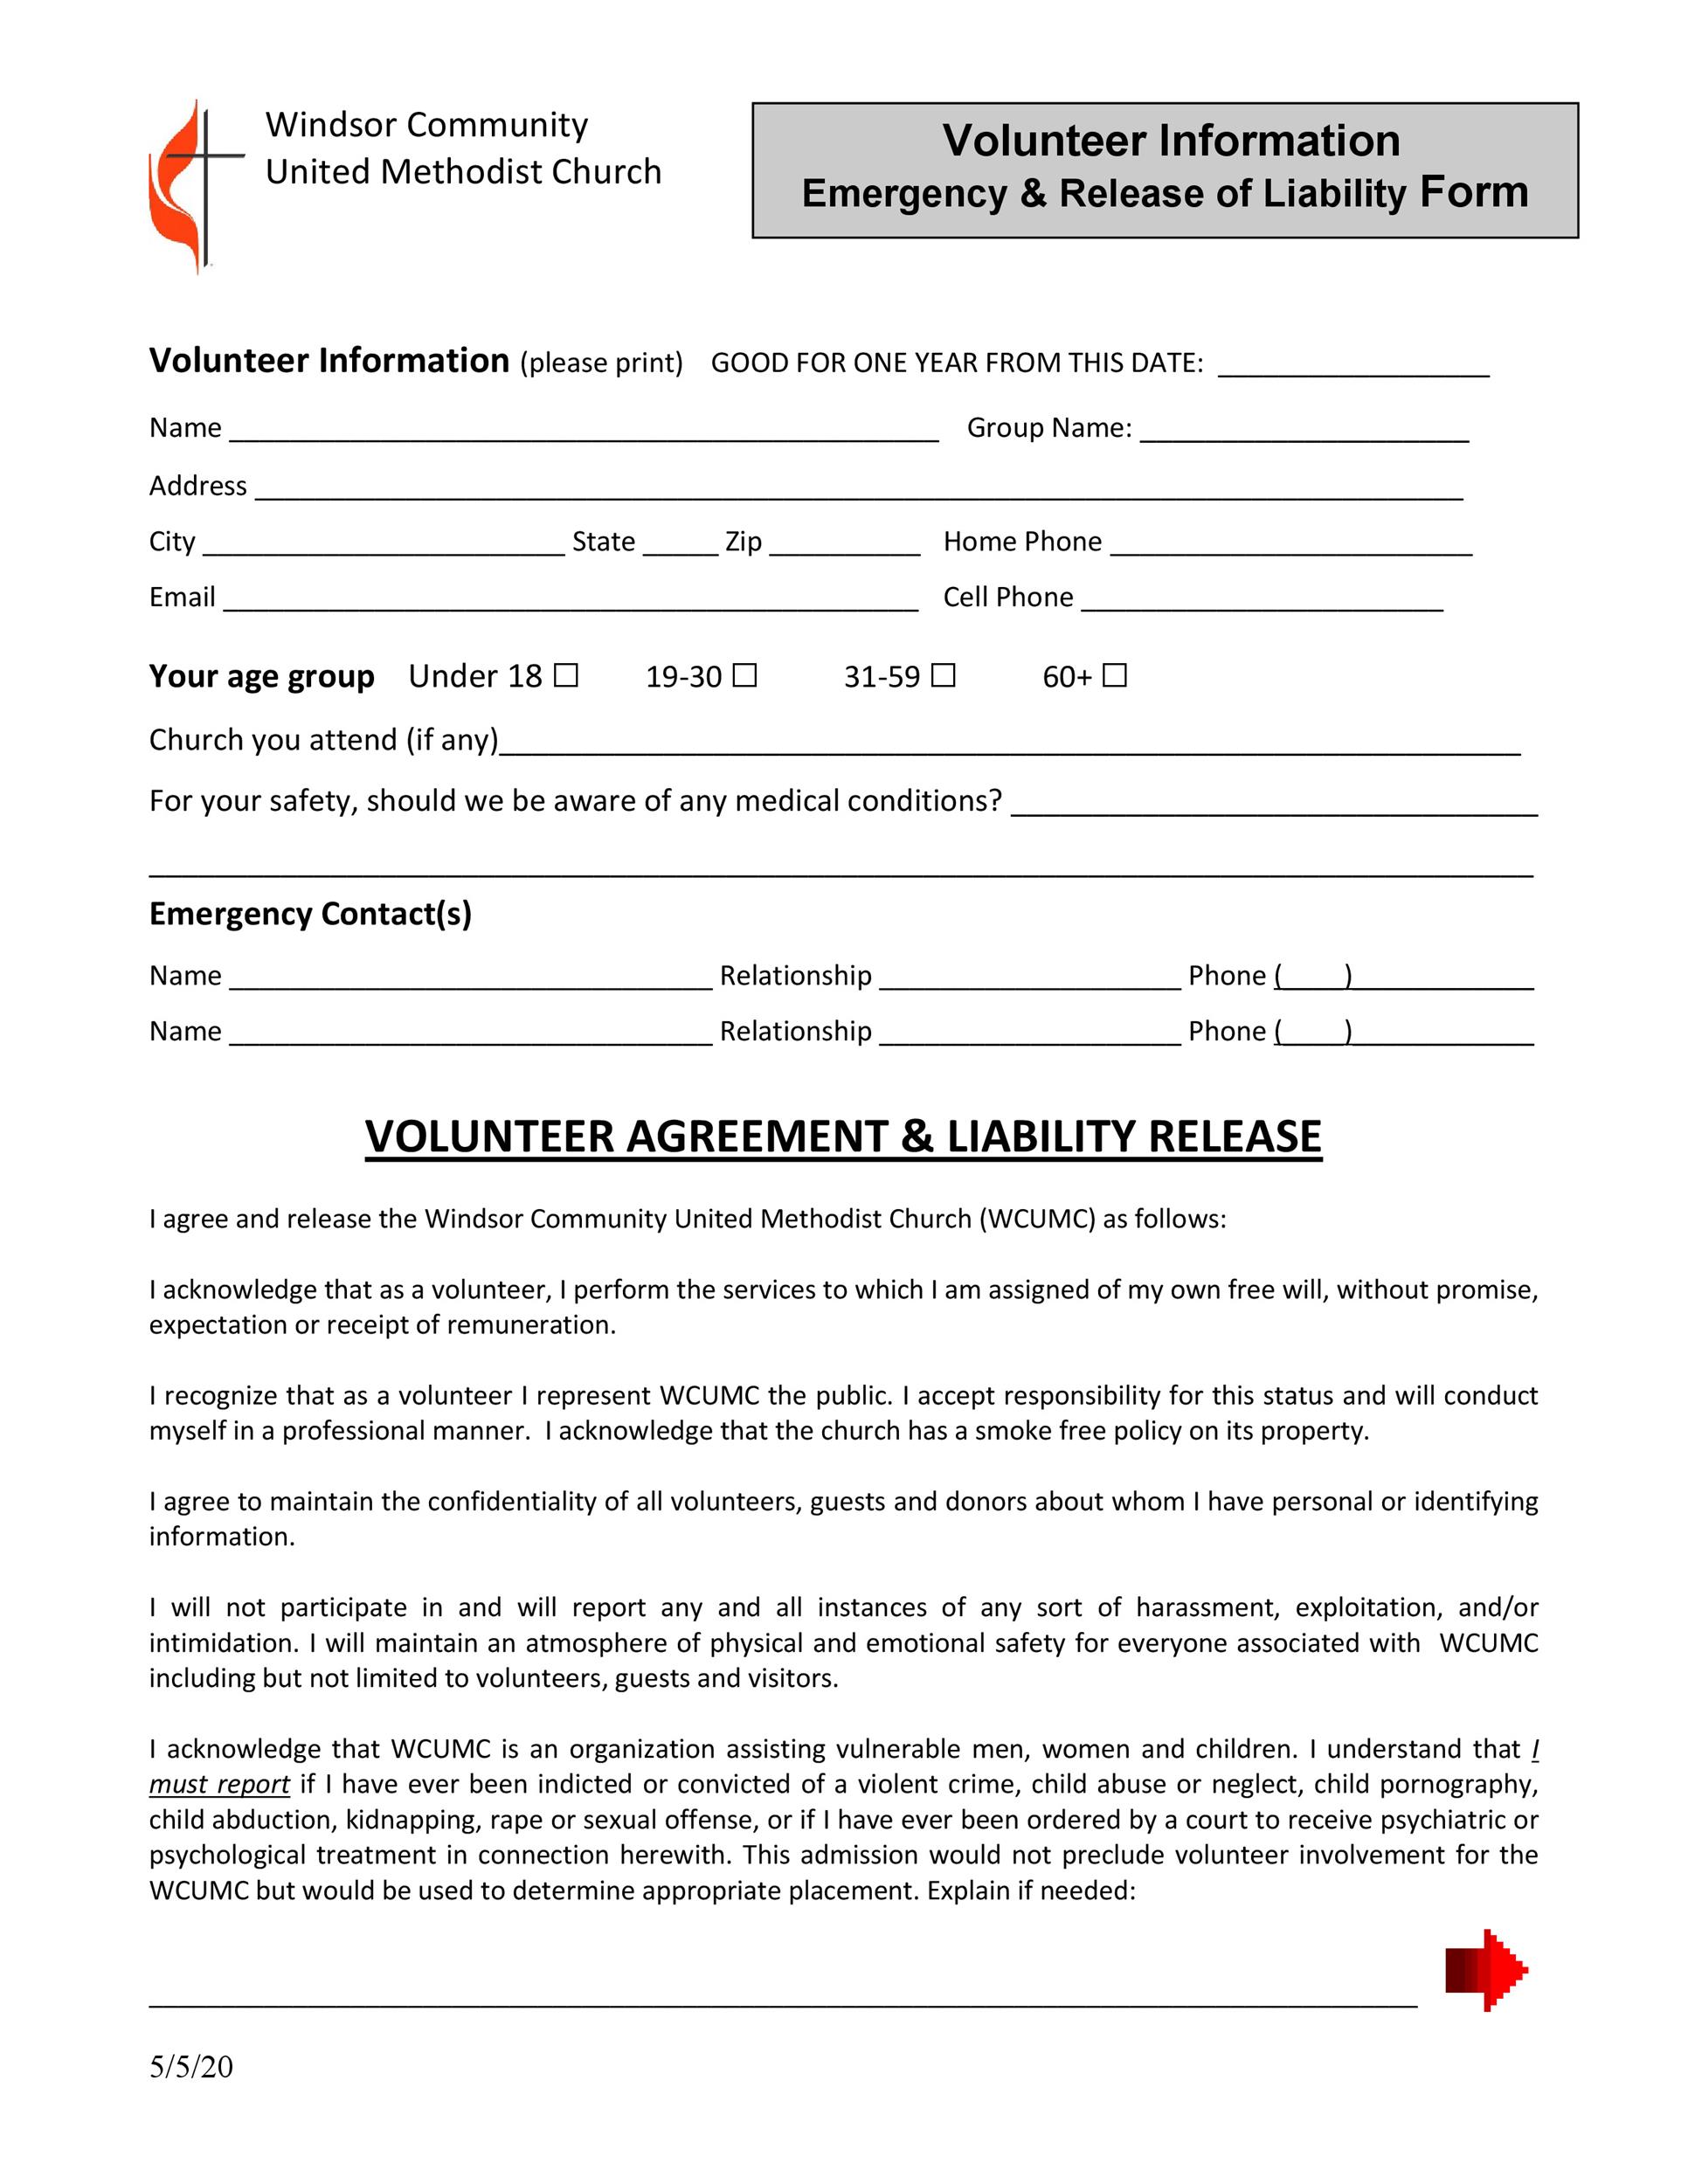 Free release of liability form 04